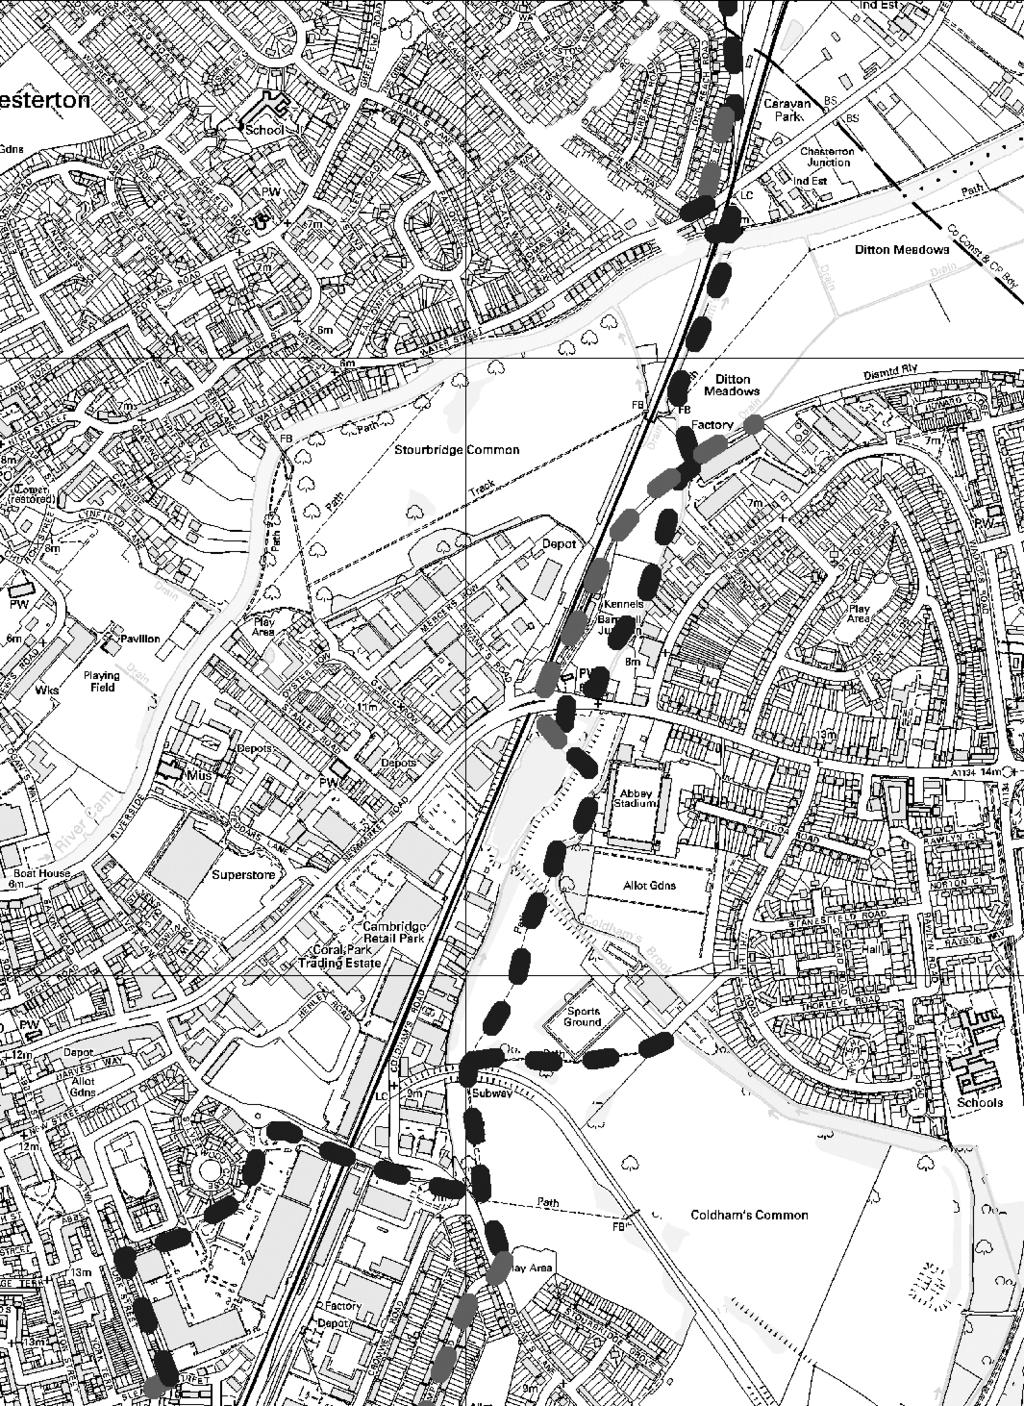 THE CHISHOLM TRAIL: A WALKING AND CYCLING ROUTE FROM CAMBRIDGE CENTRAL STATION TO THE PLANNED SCIENCE PARK STATION DRAFT NOTES 9TH JULY 05 REVISION PAGE Works Access and Compounds It is important